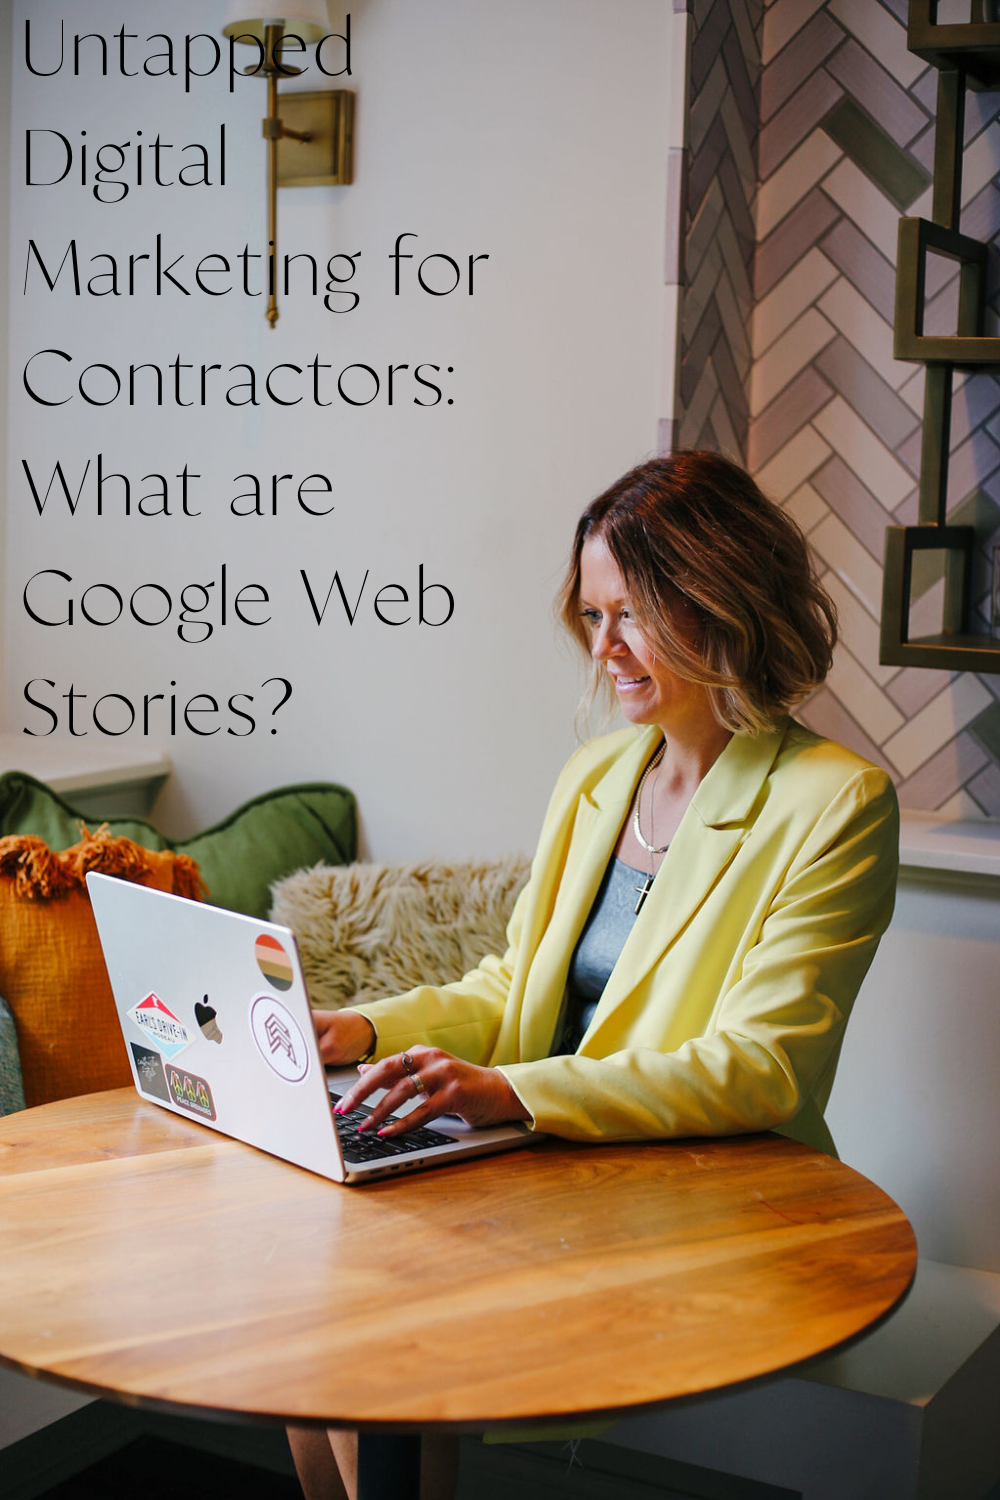 What are Google Web stories?